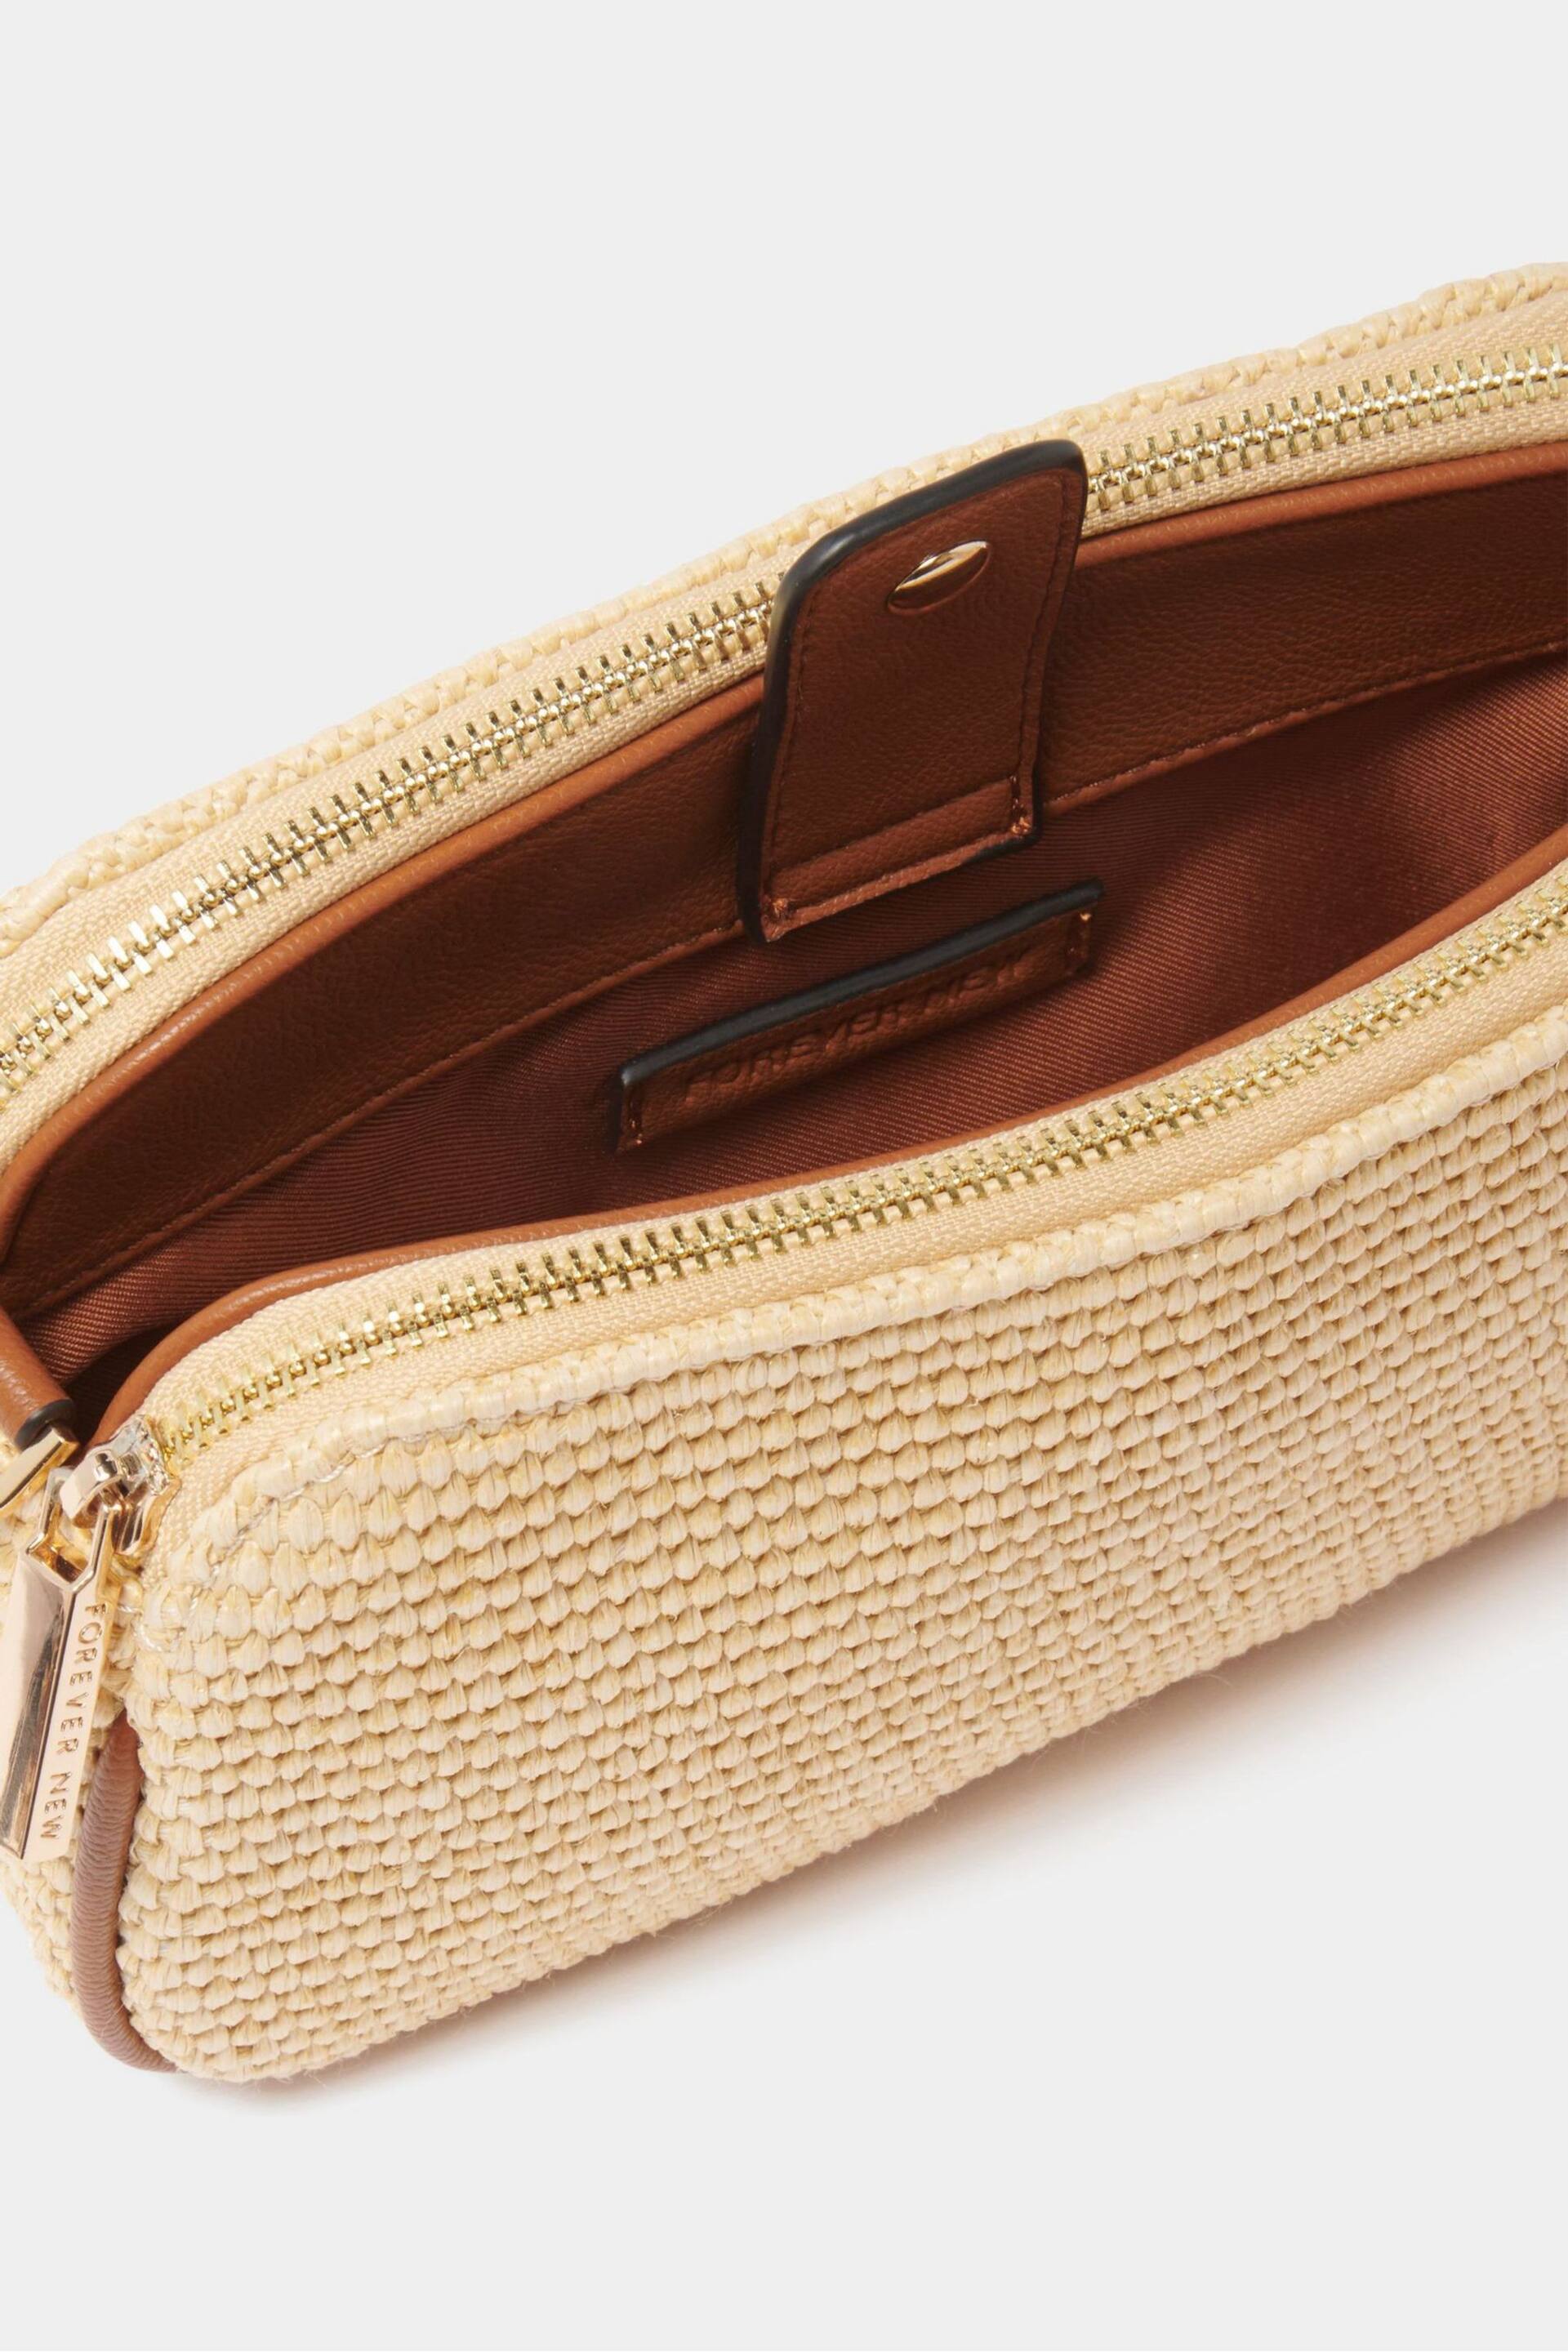 Forever New Natural Andrea Weave Camera Bag - Image 2 of 4